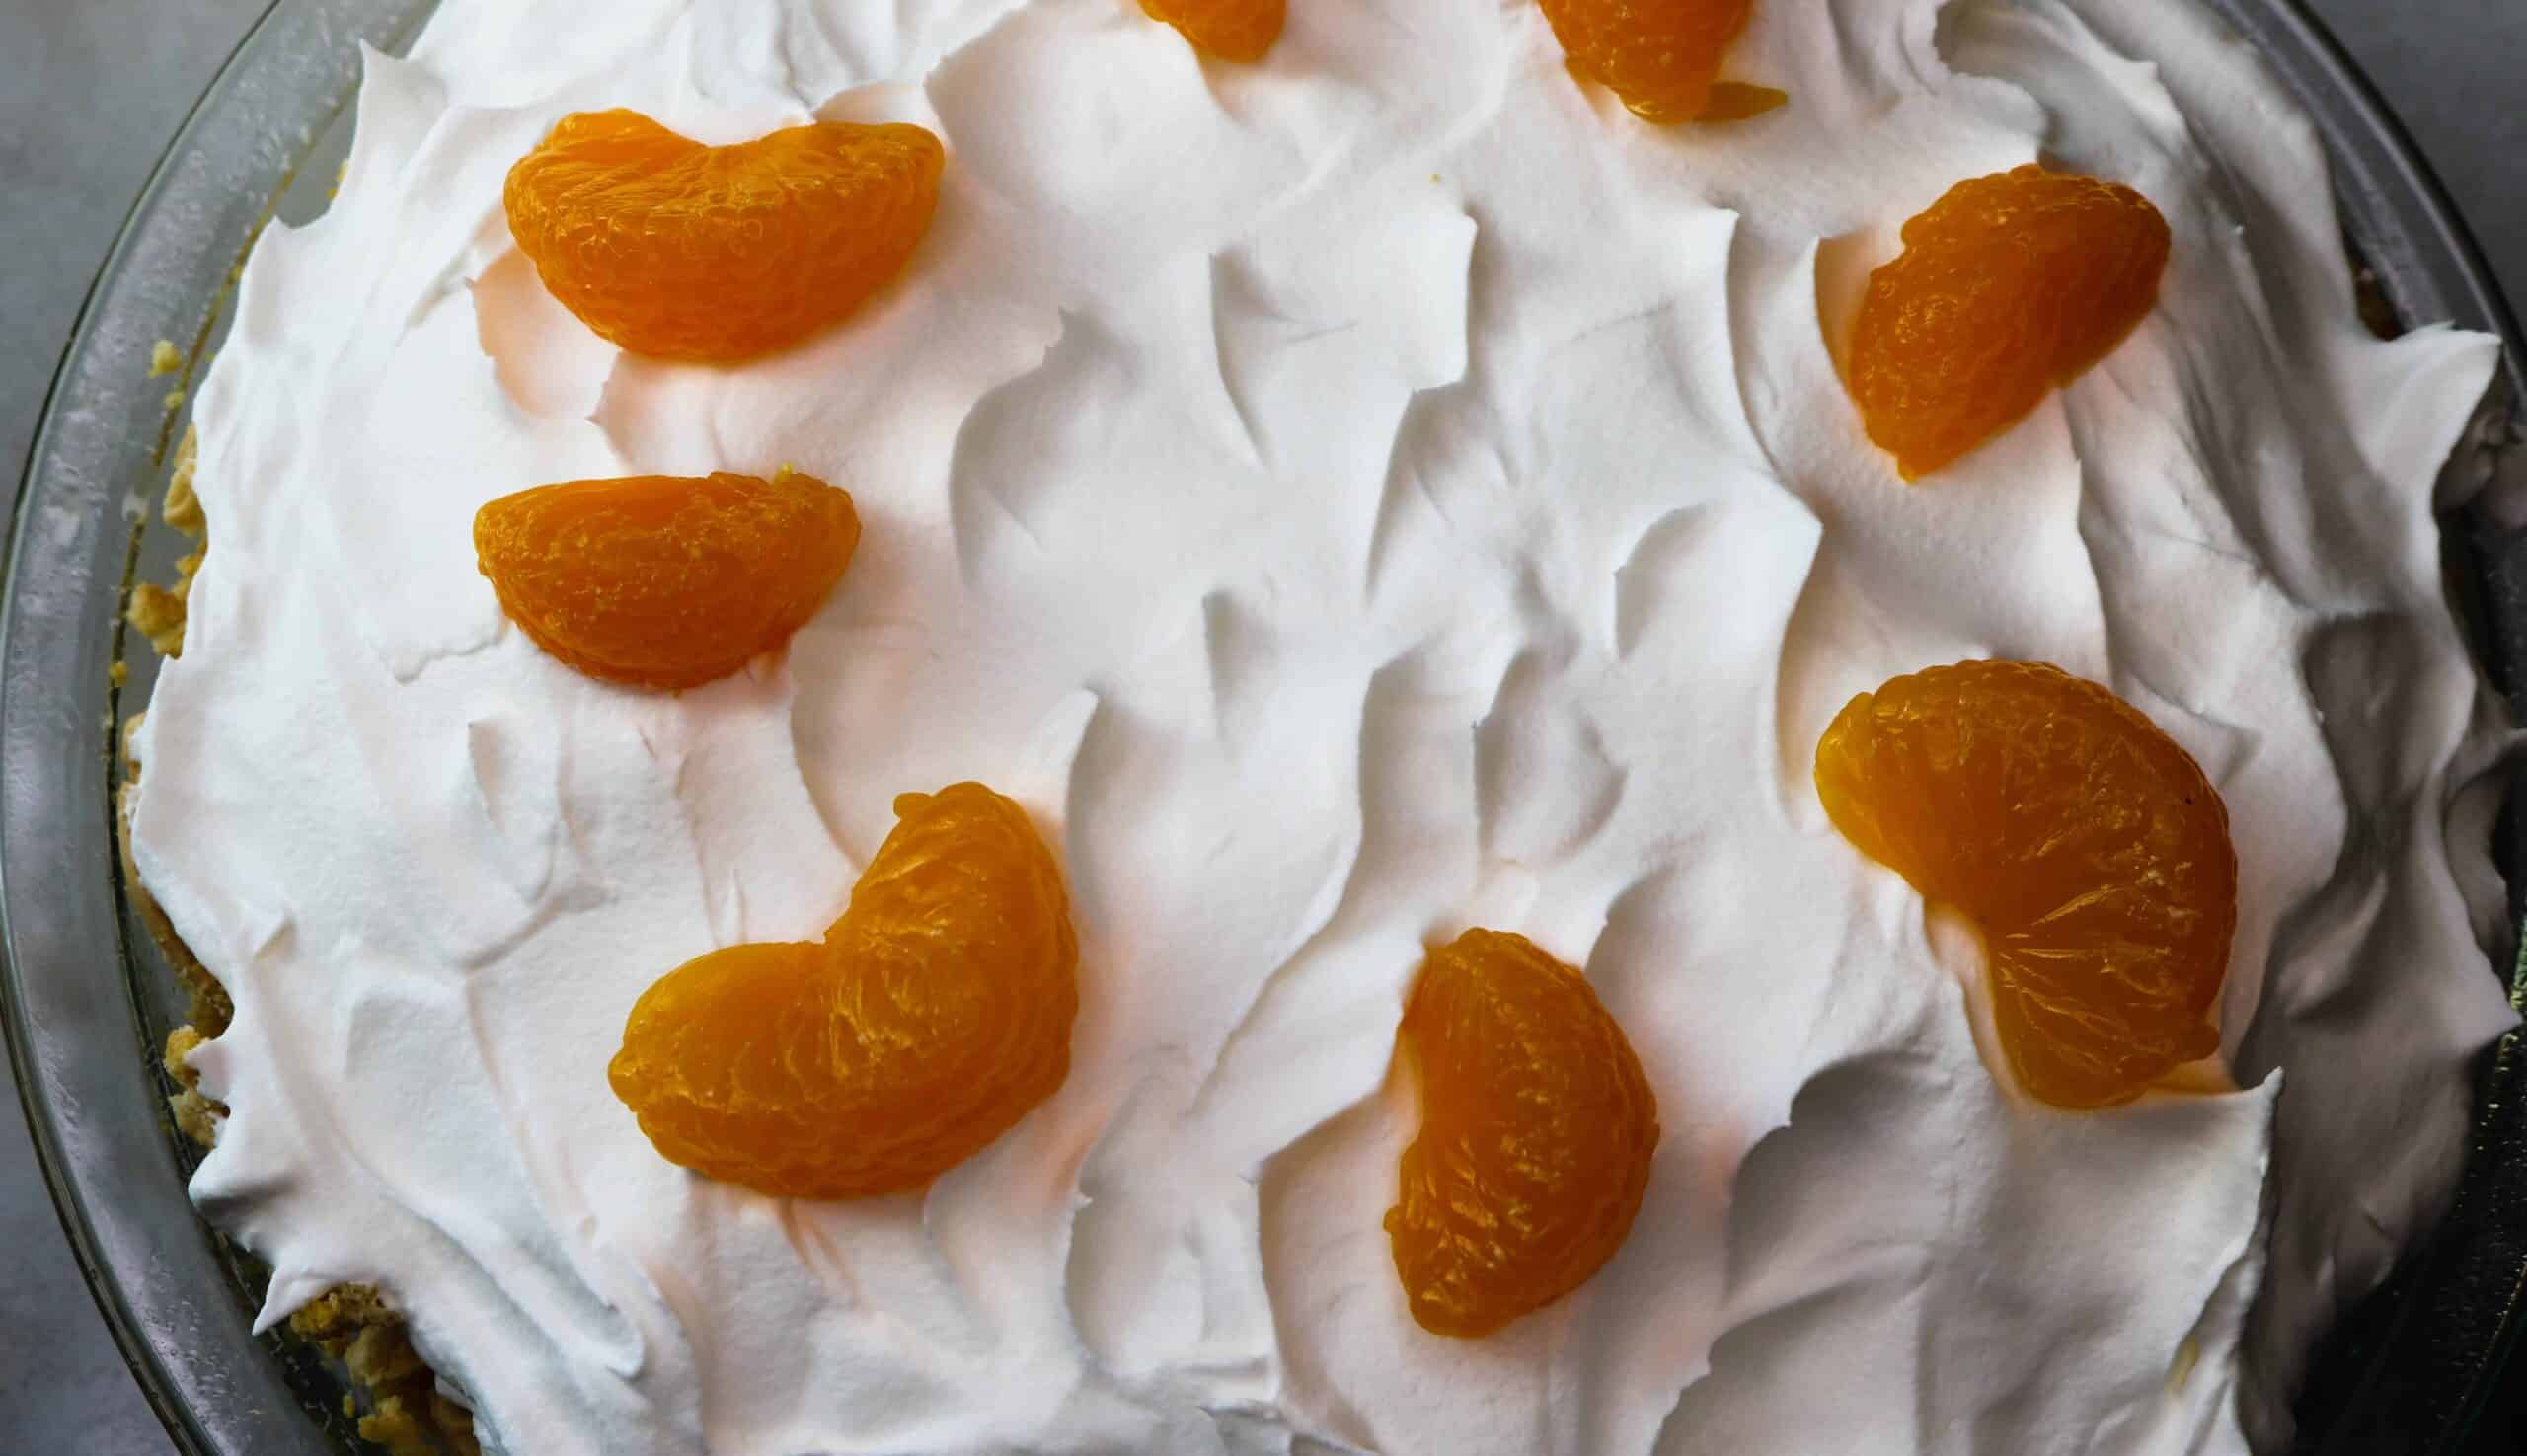 Third layer of smooth whipped topping added to the pie and topped with Mandarin orange slices